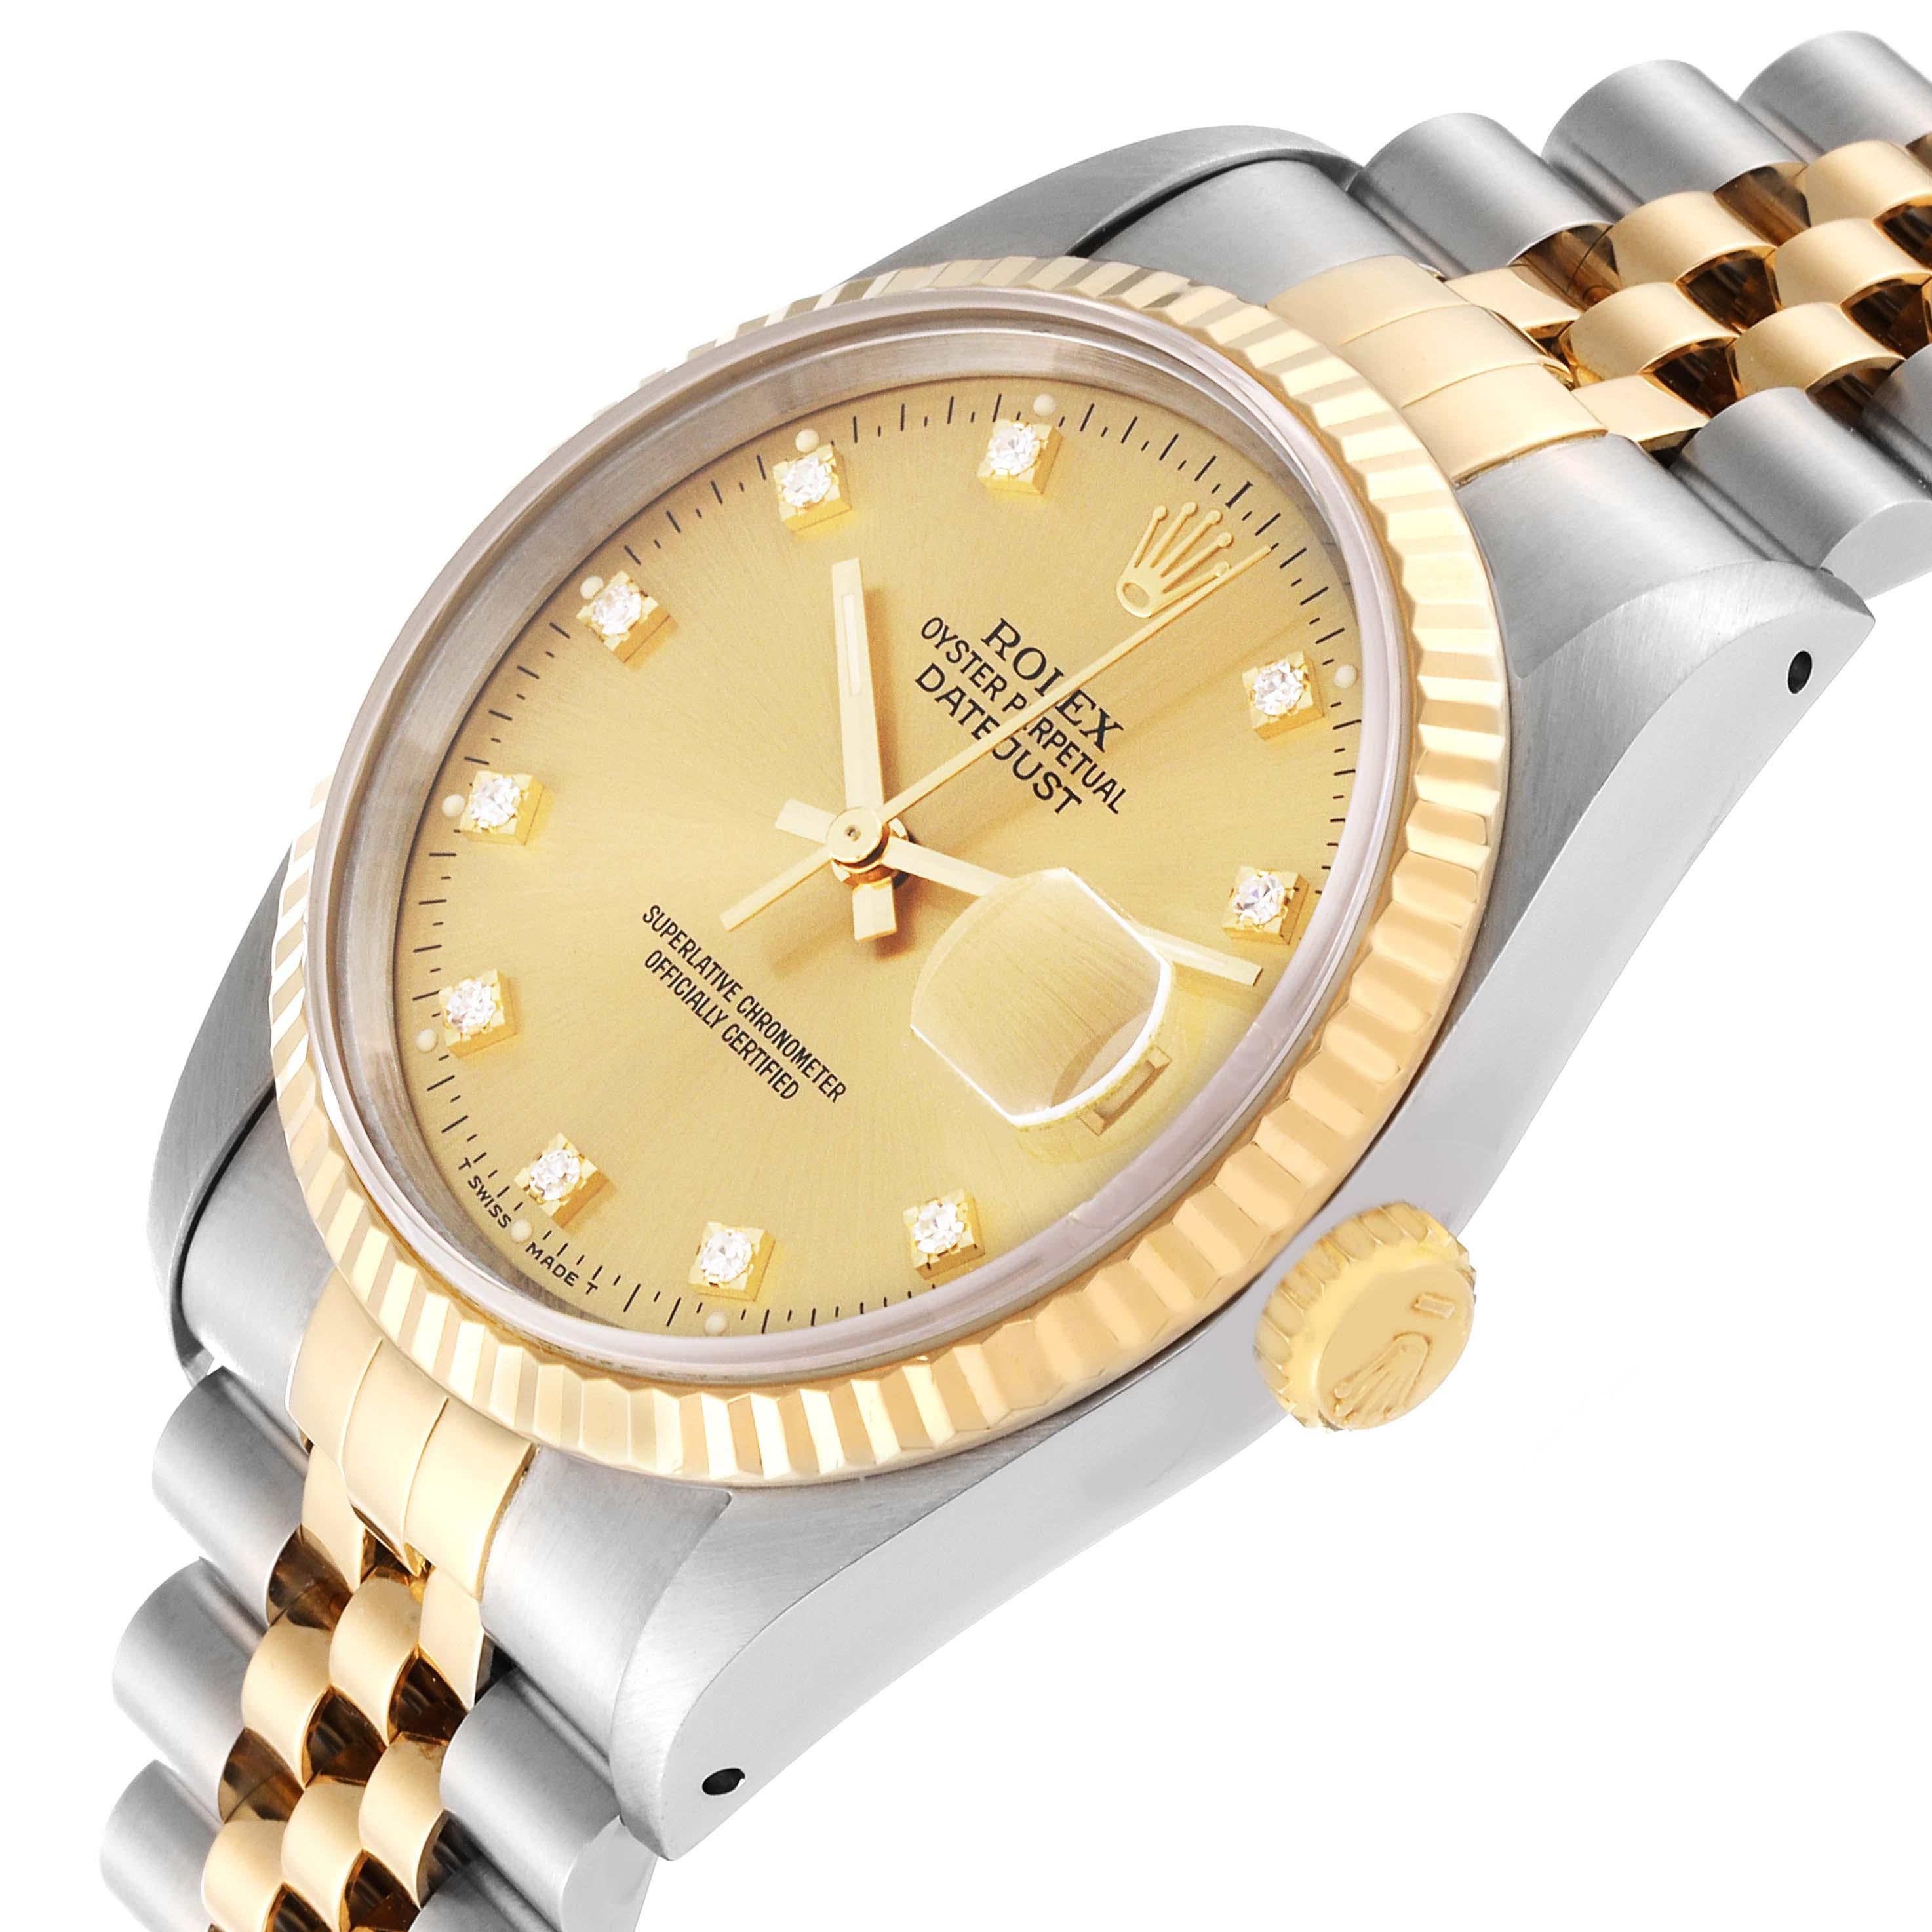 Rolex Datejust Champagne Diamond Dial Steel Yellow Gold Mens Watch 16233 For Sale 4